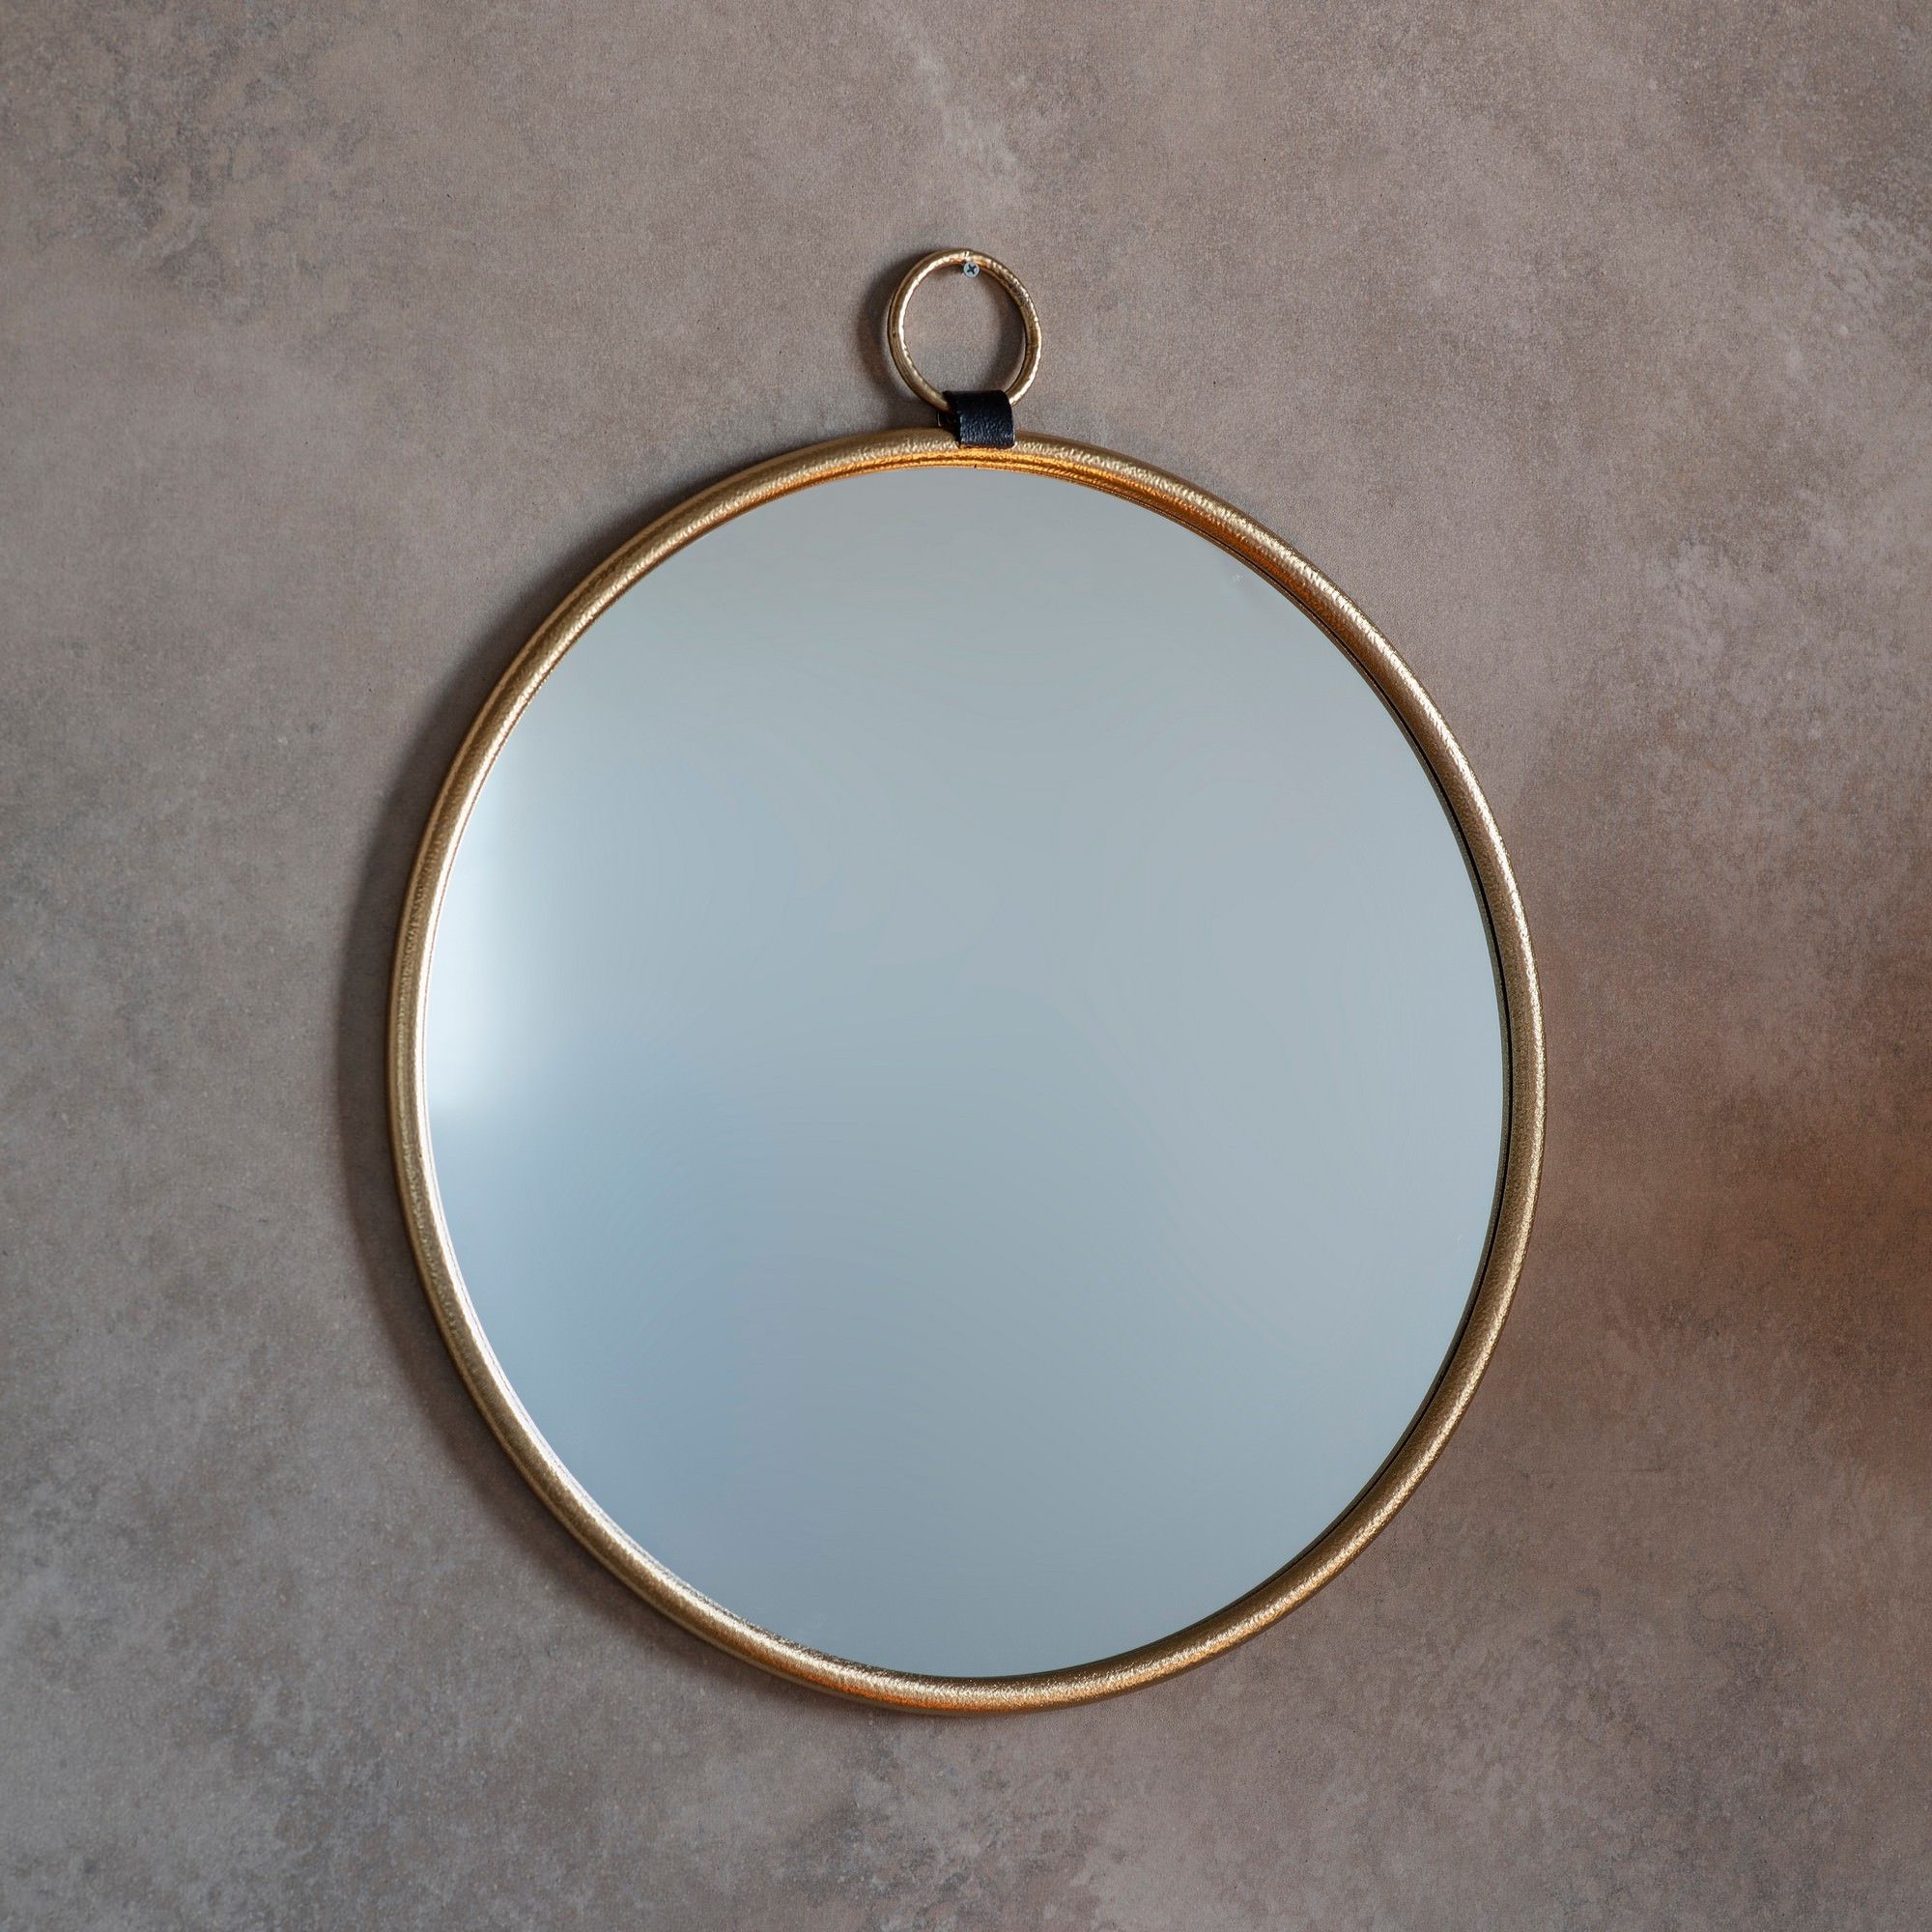 Bainbridge Iron Frame Round Wall Mirror, 70cm, Gold Within Most Recent Gold Rounded Corner Wall Mirrors (View 9 of 15)